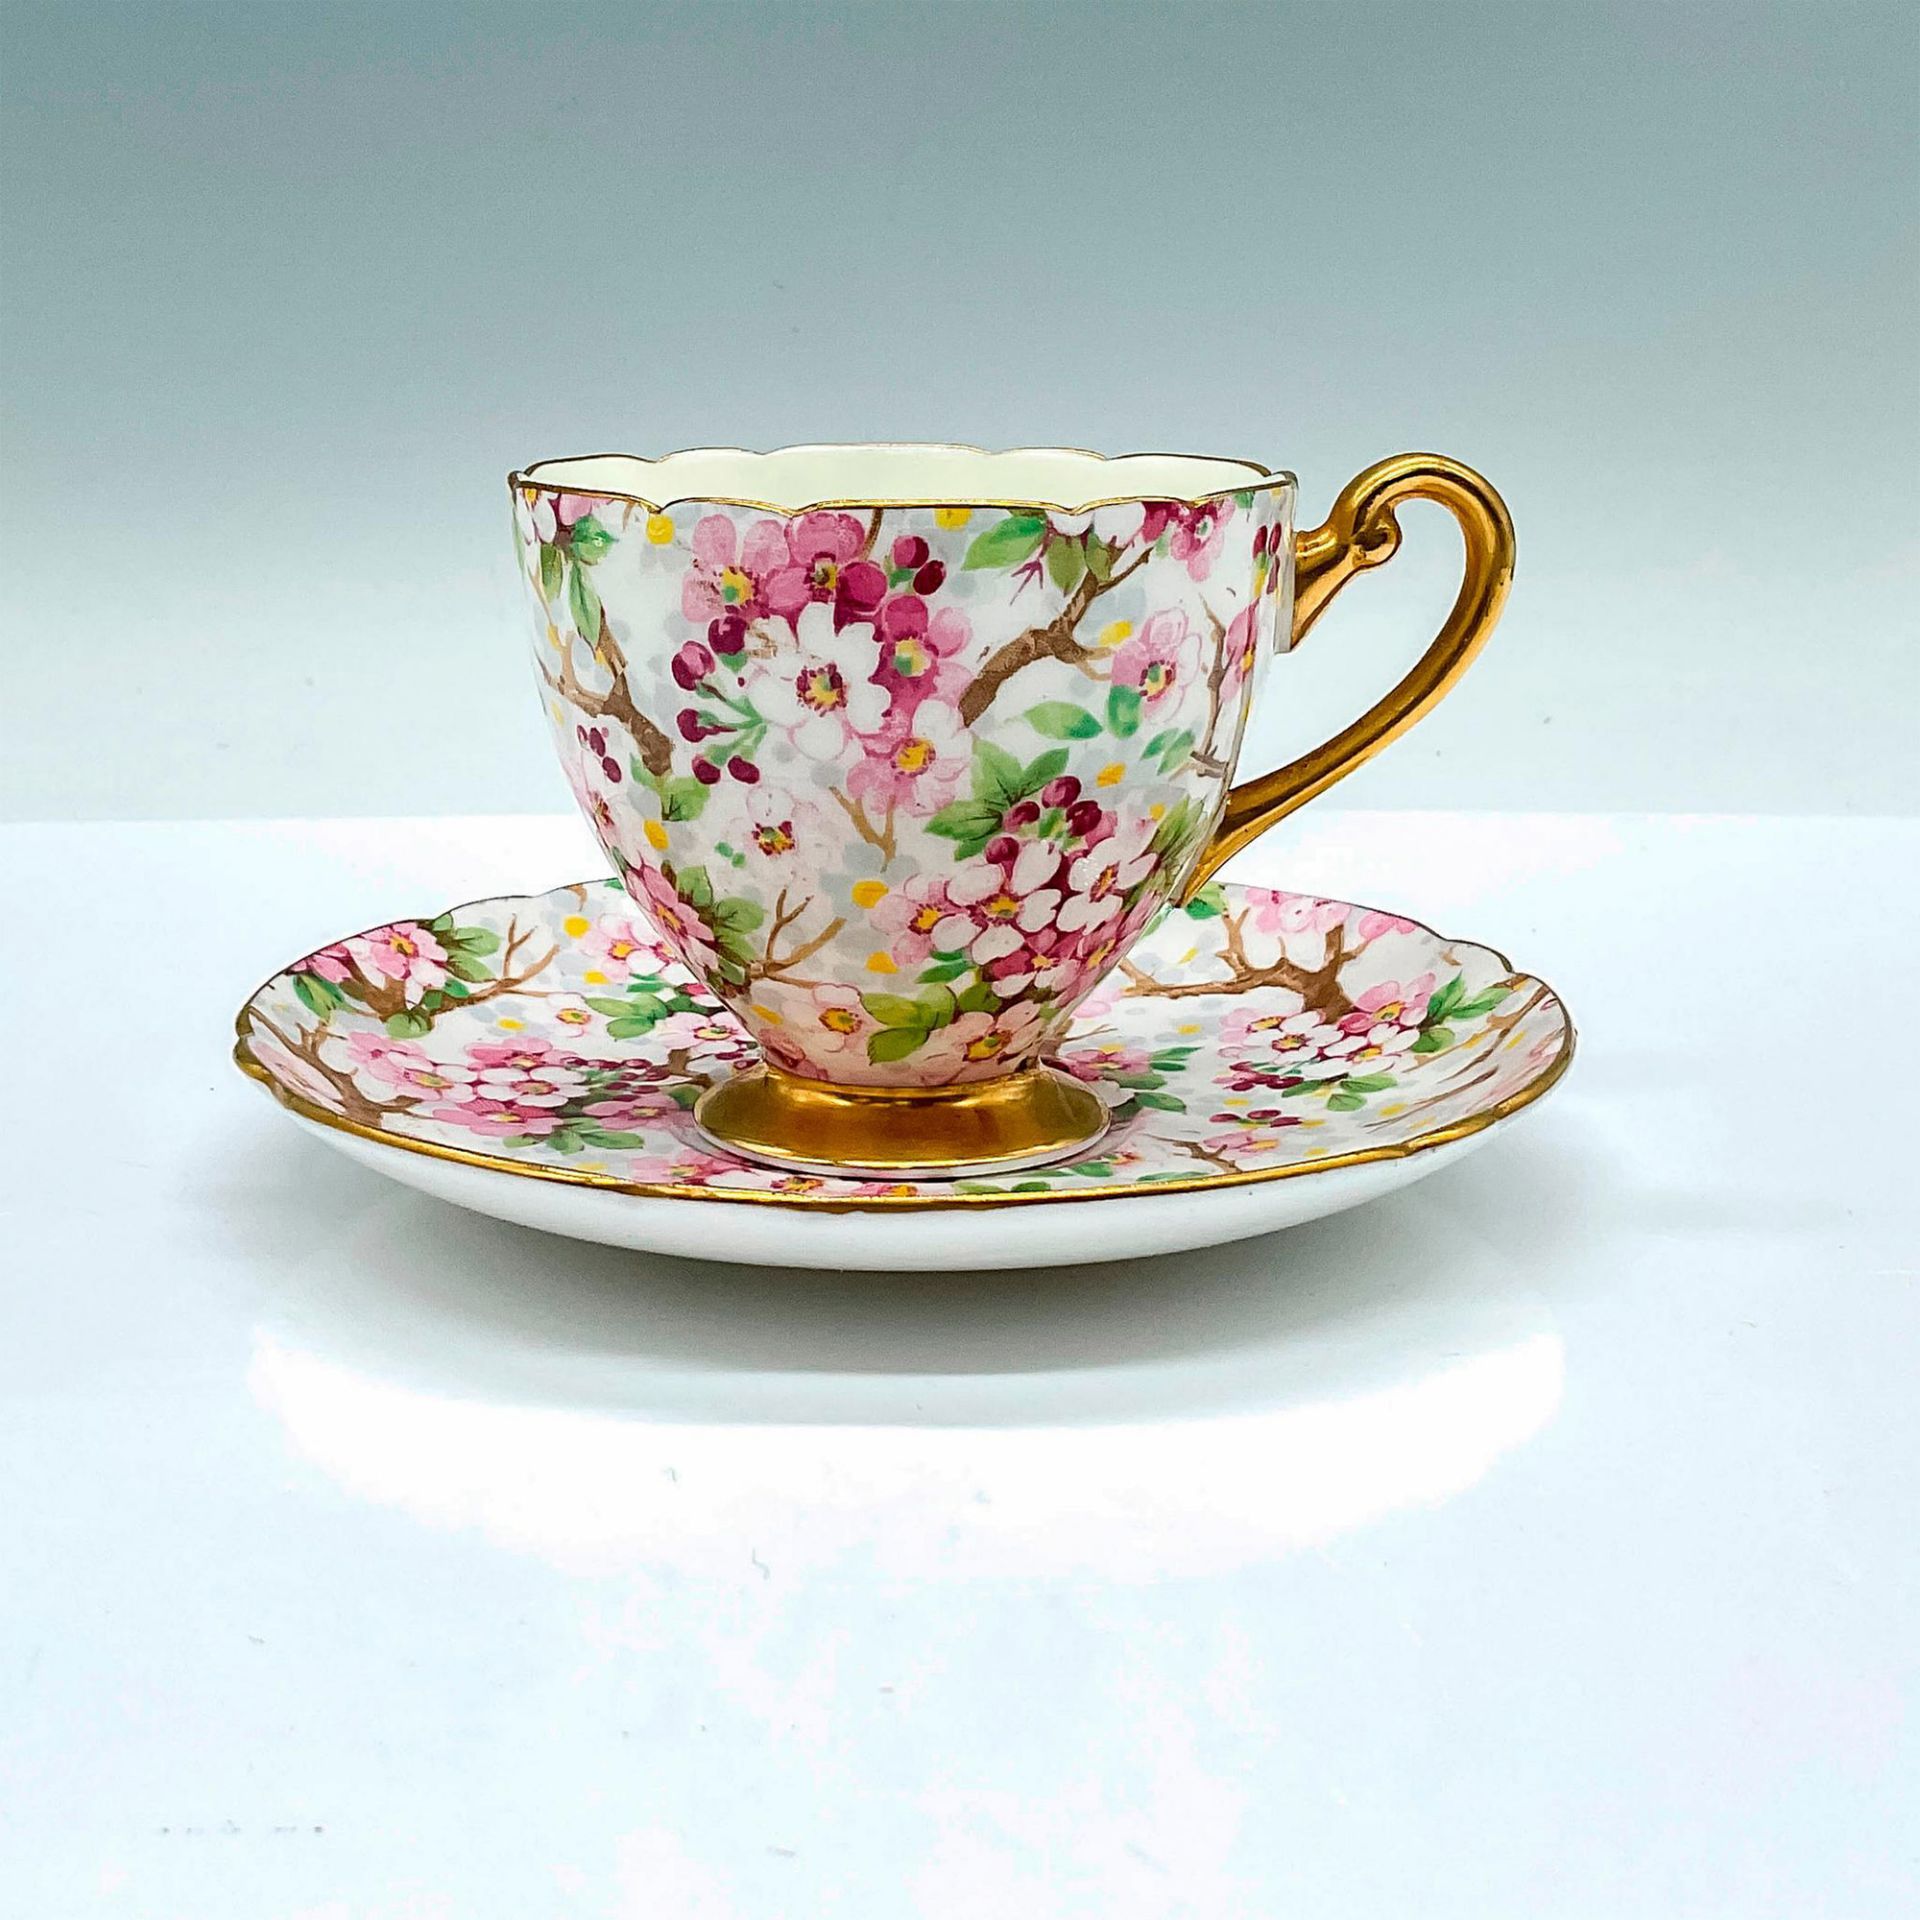 2pc Shelley China Teacup and Saucer, Maytime